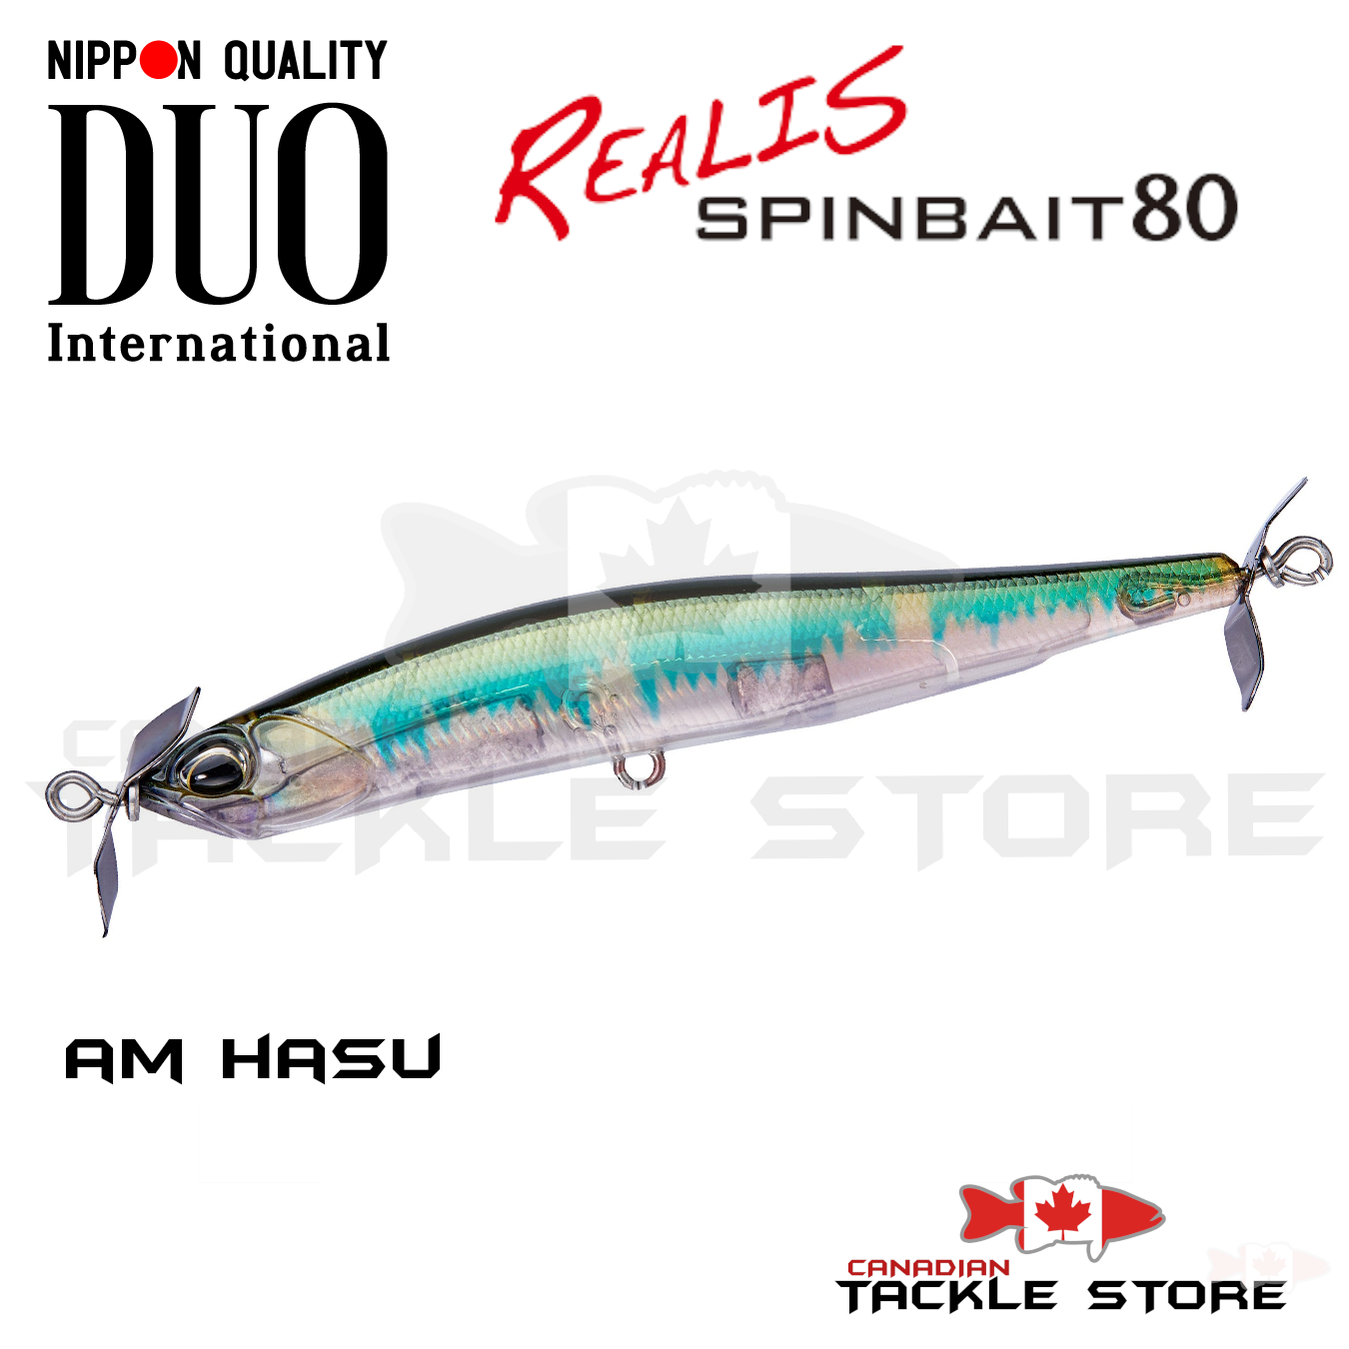 Duo Realis Spybait 80 – Canadian Tackle Store